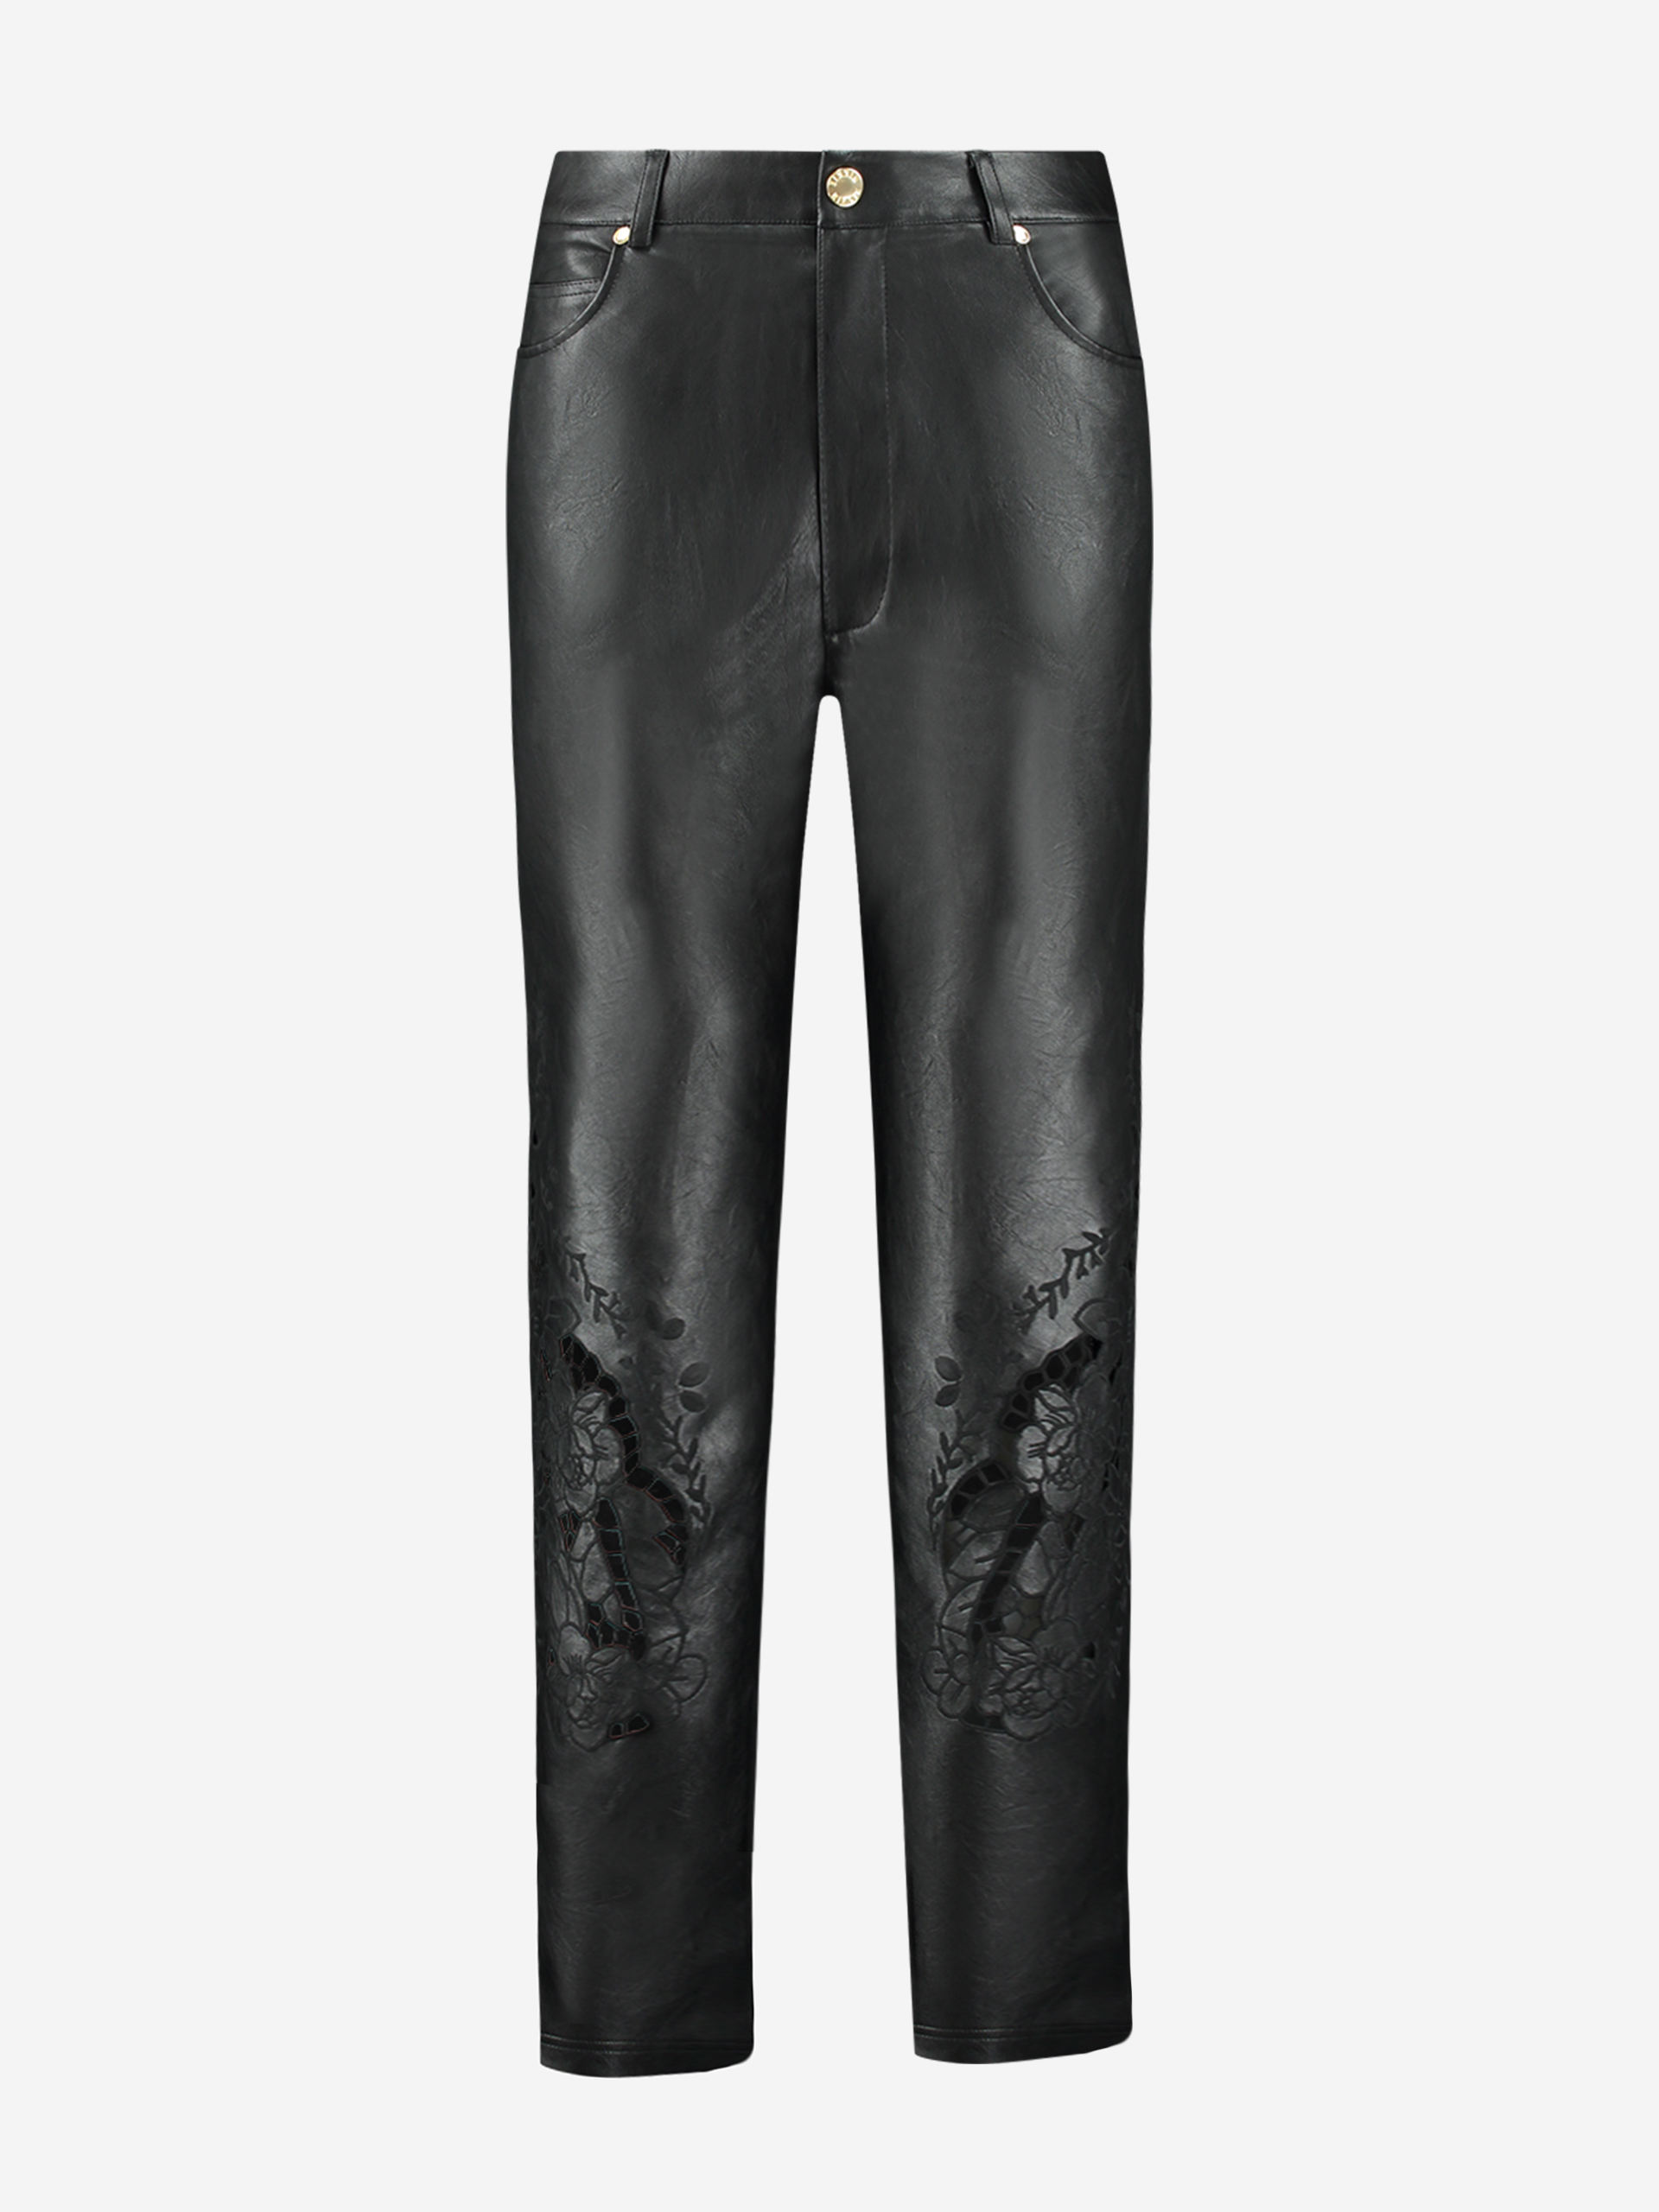 Low rise vegan leather pants with embroidery details